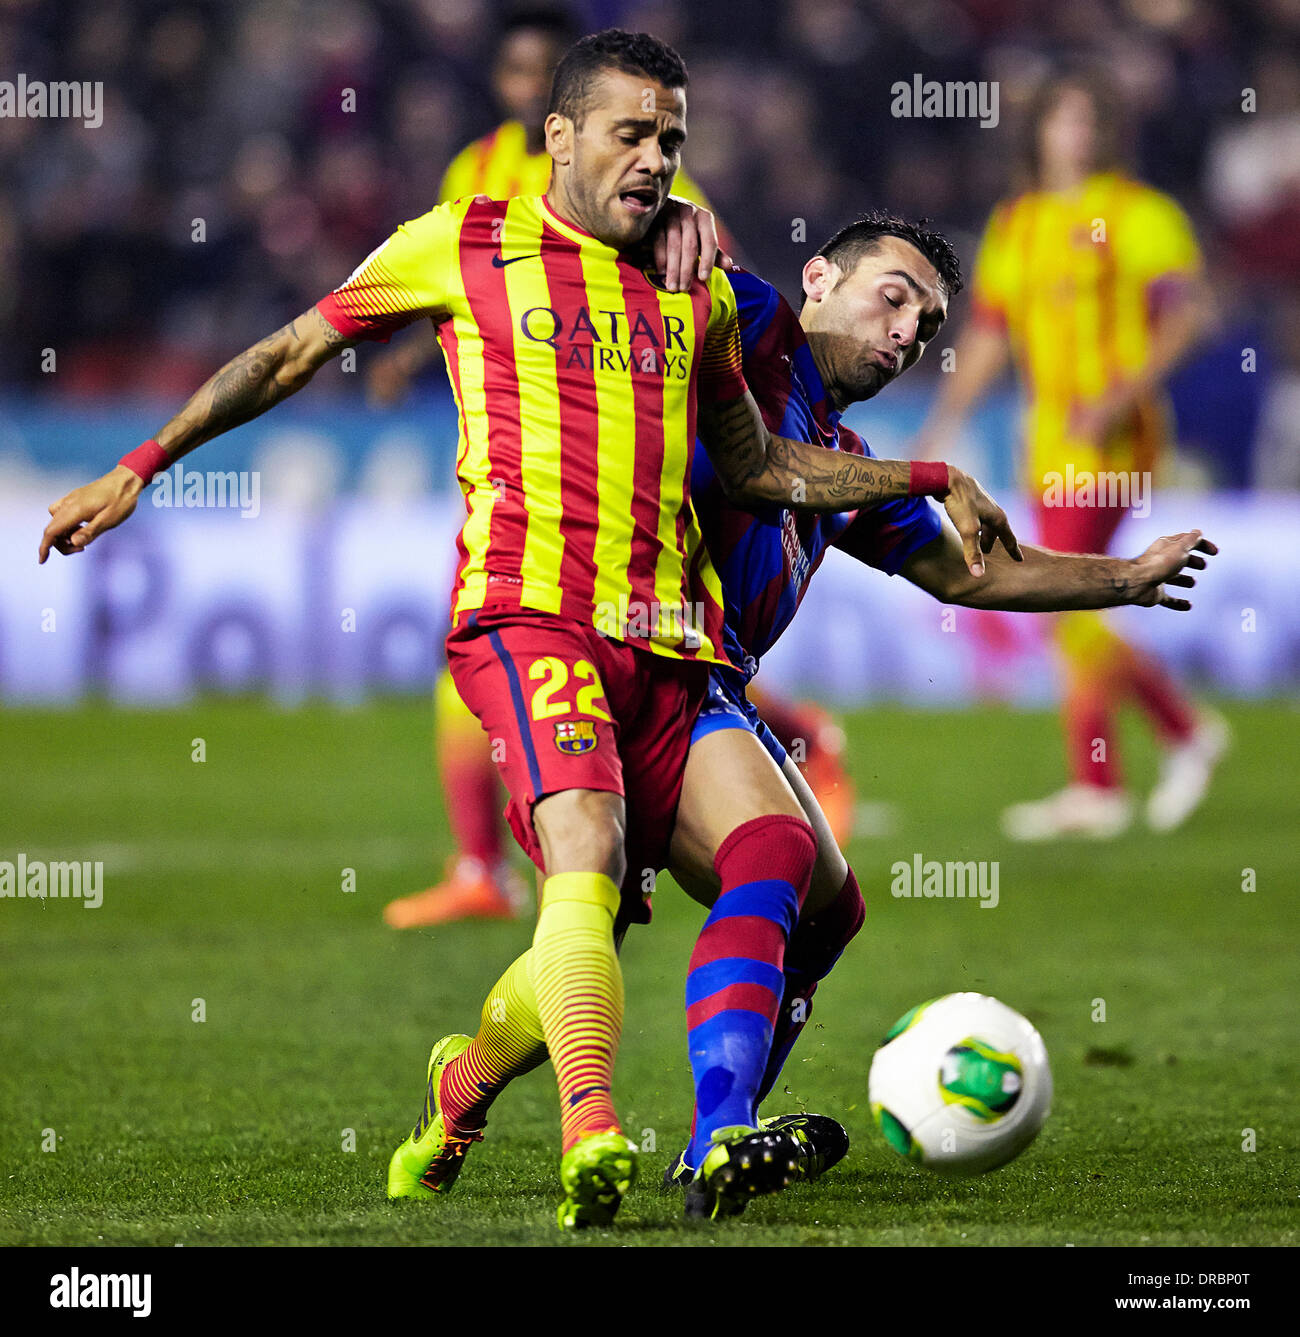 Valencia, Spain. 22nd Jan, 2014. Defender Dani Alves of FC Barcelona (R) takes on Forward Barral of Levante U.D. during the Copa del Rey game between Levante and Barcelona at the Ciutat de Valencia, Valencia Credit:  Action Plus Sports/Alamy Live News Stock Photo